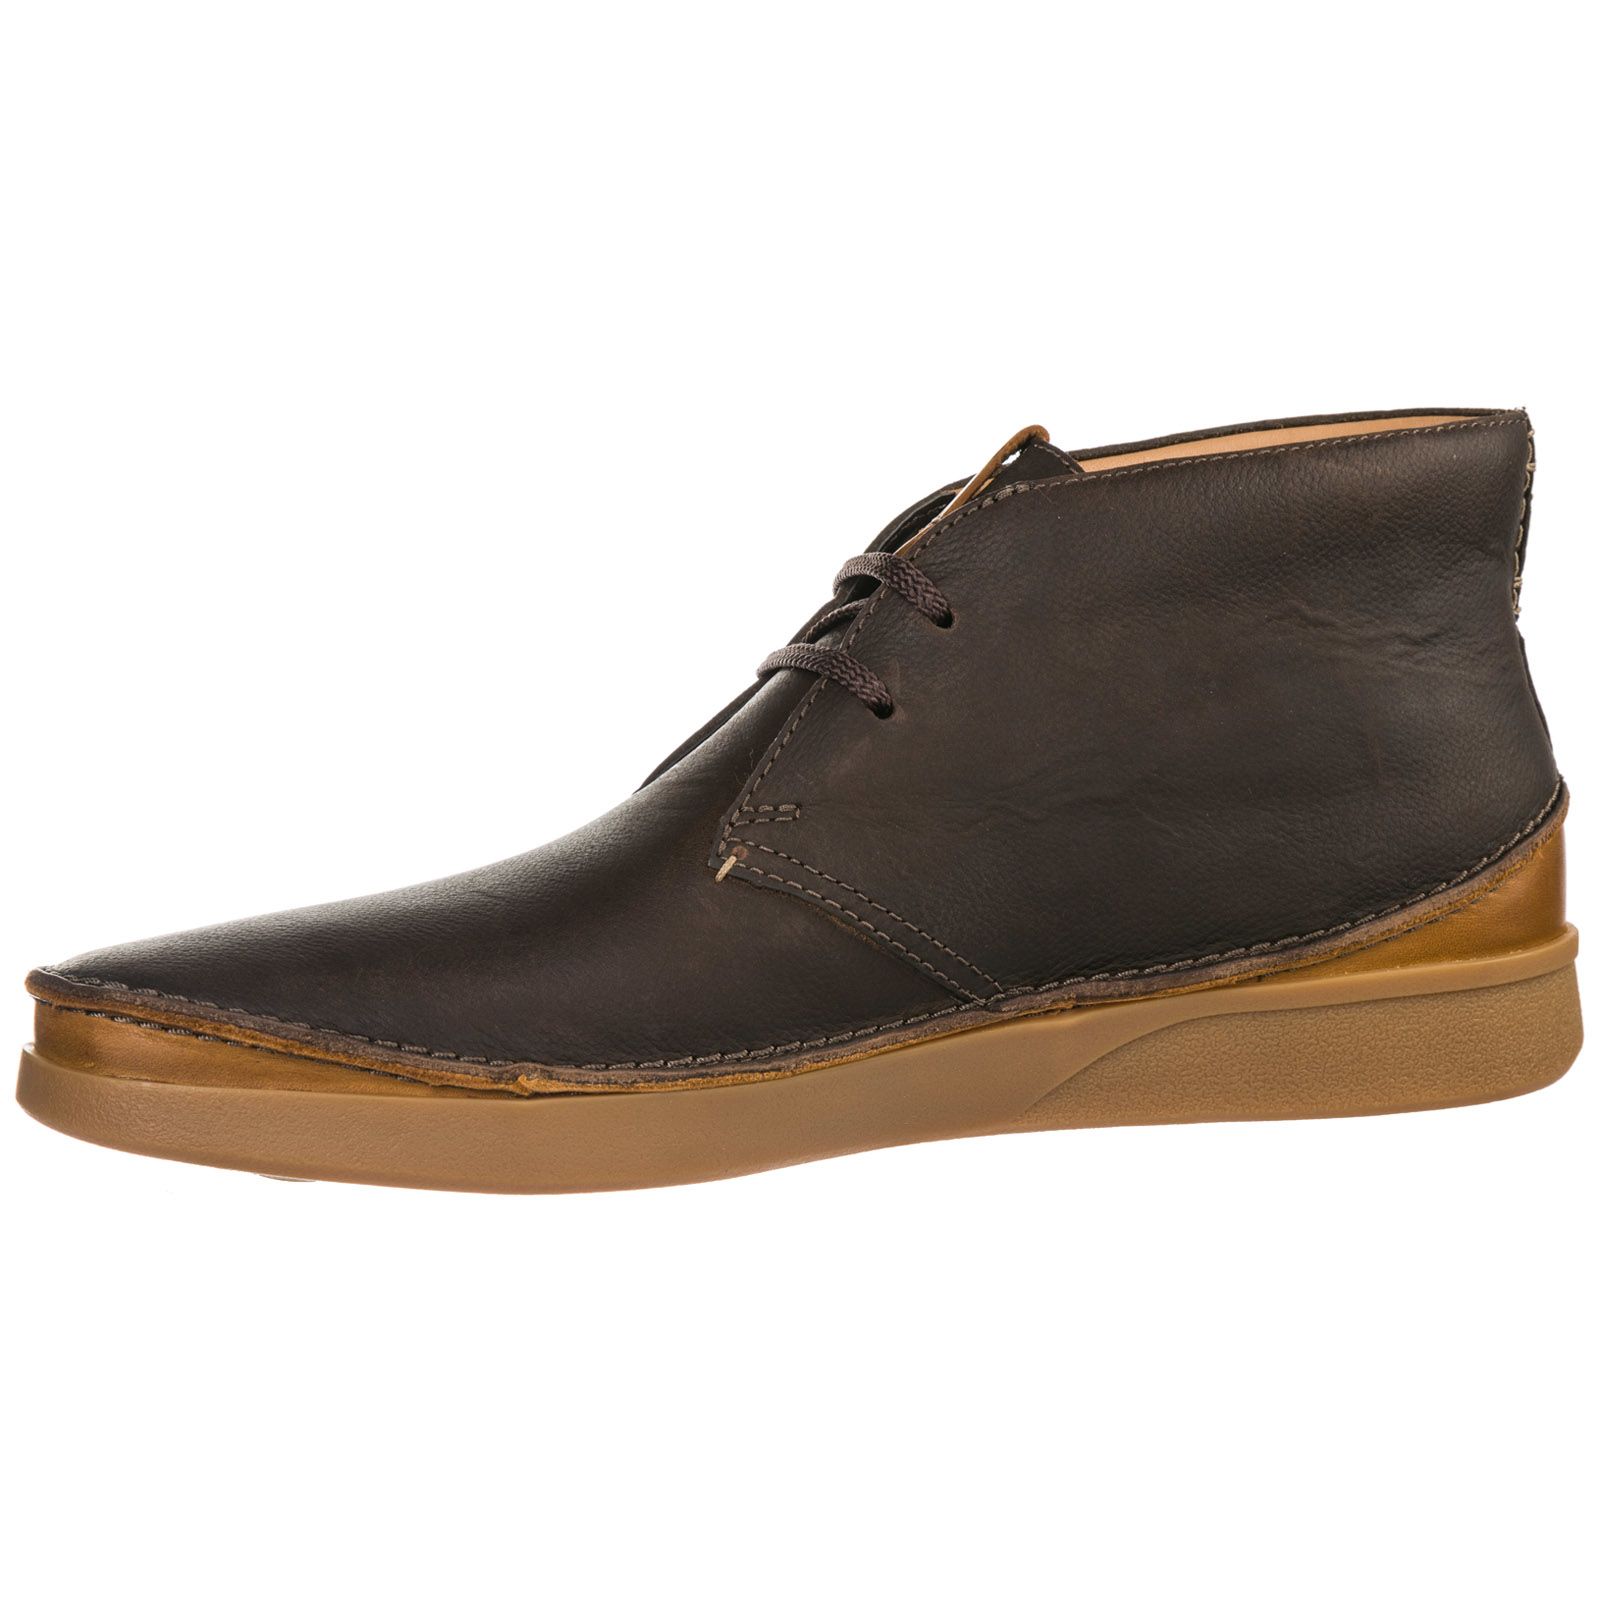 Clarks Clarks Suede Desert Boots Lace Up Ankle Boots Oakland - Brown ...